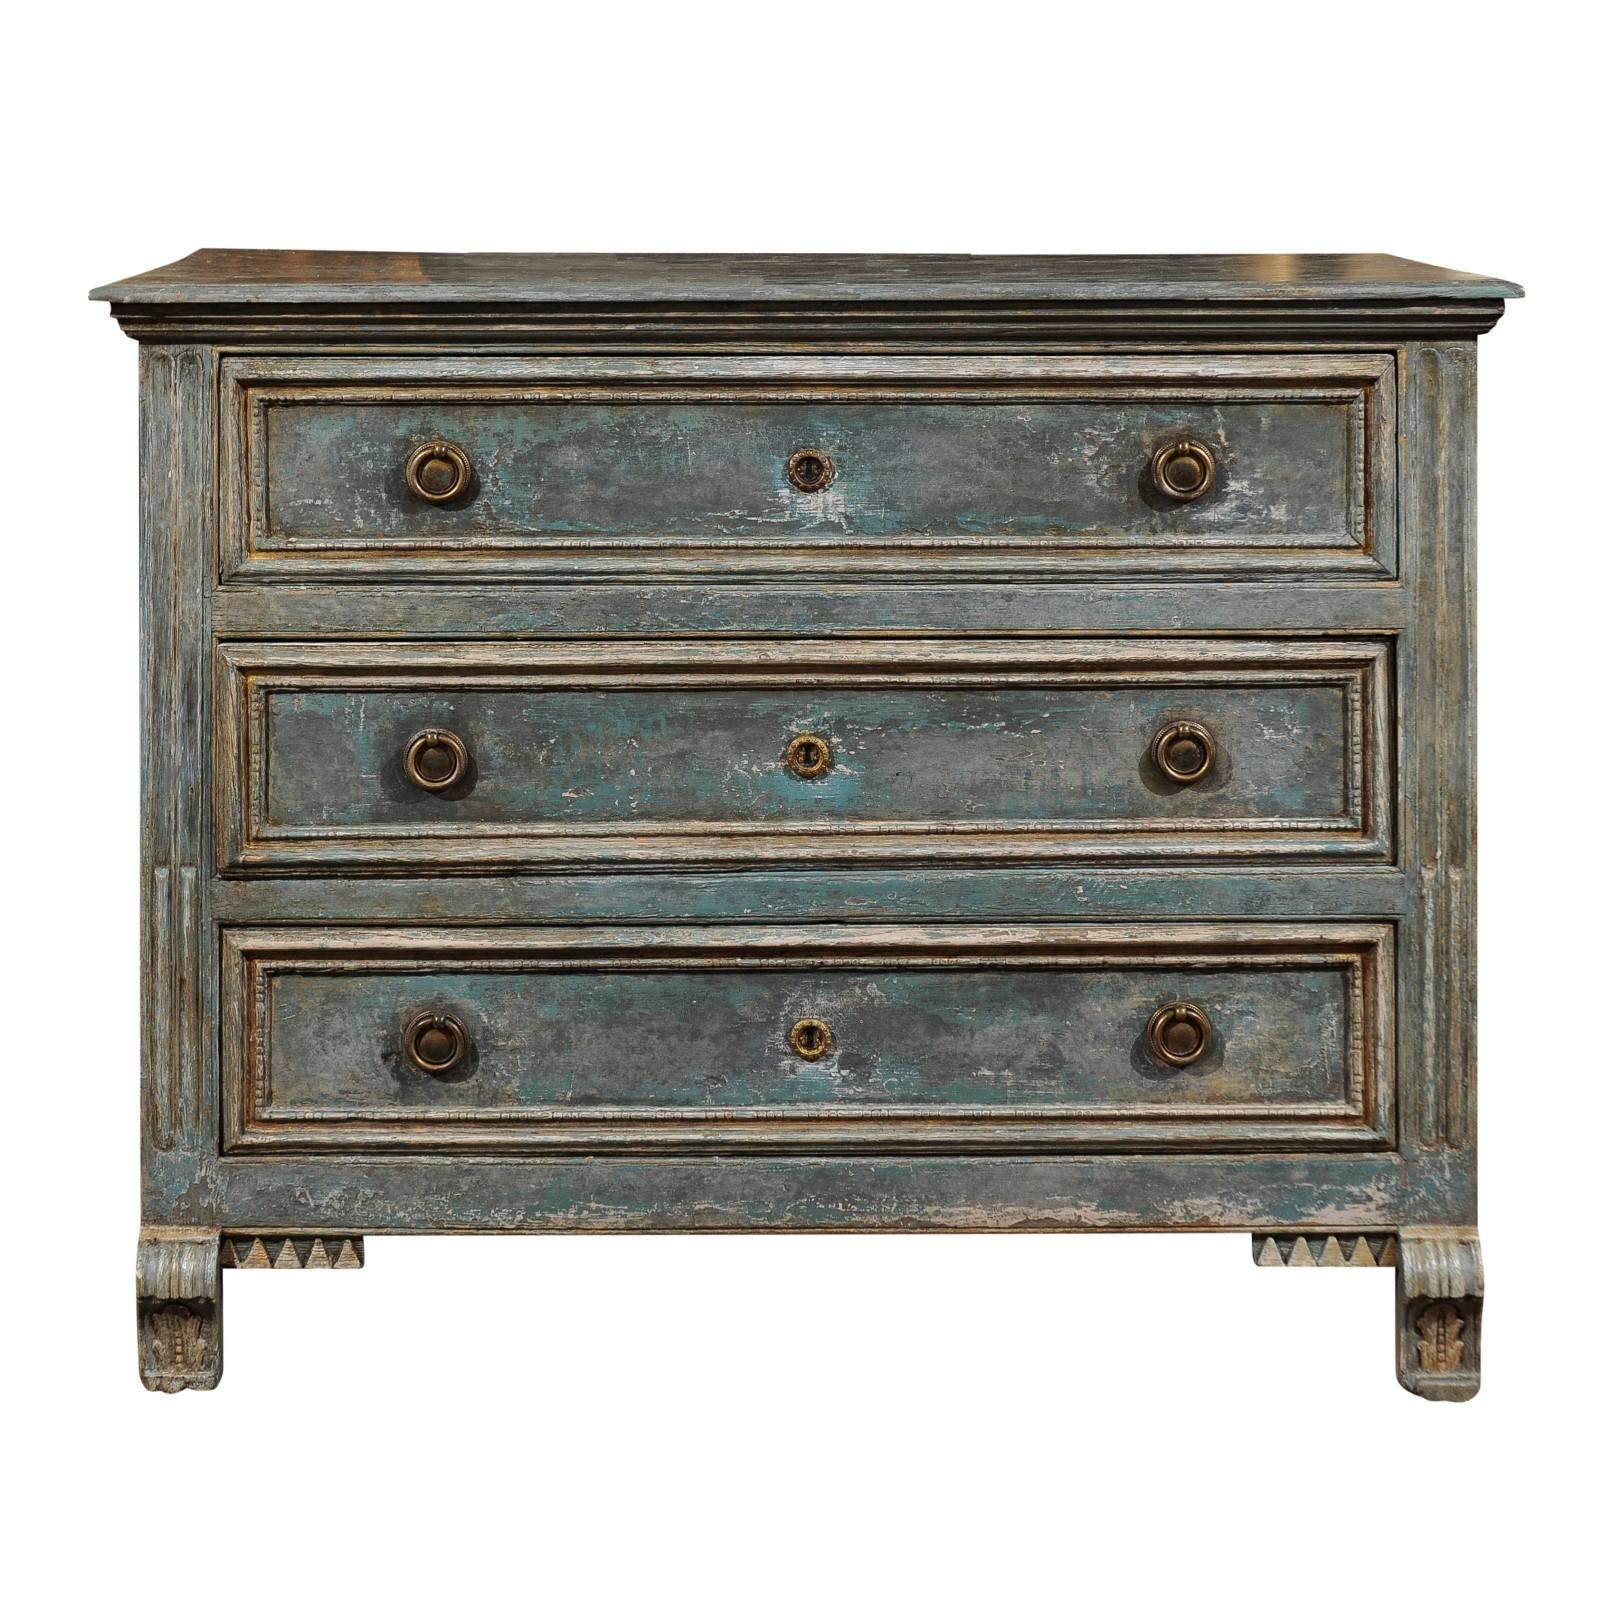 Swedish 1820s Neoclassical Blue Painted Pine Three-Drawer Chest with Corbel Feet